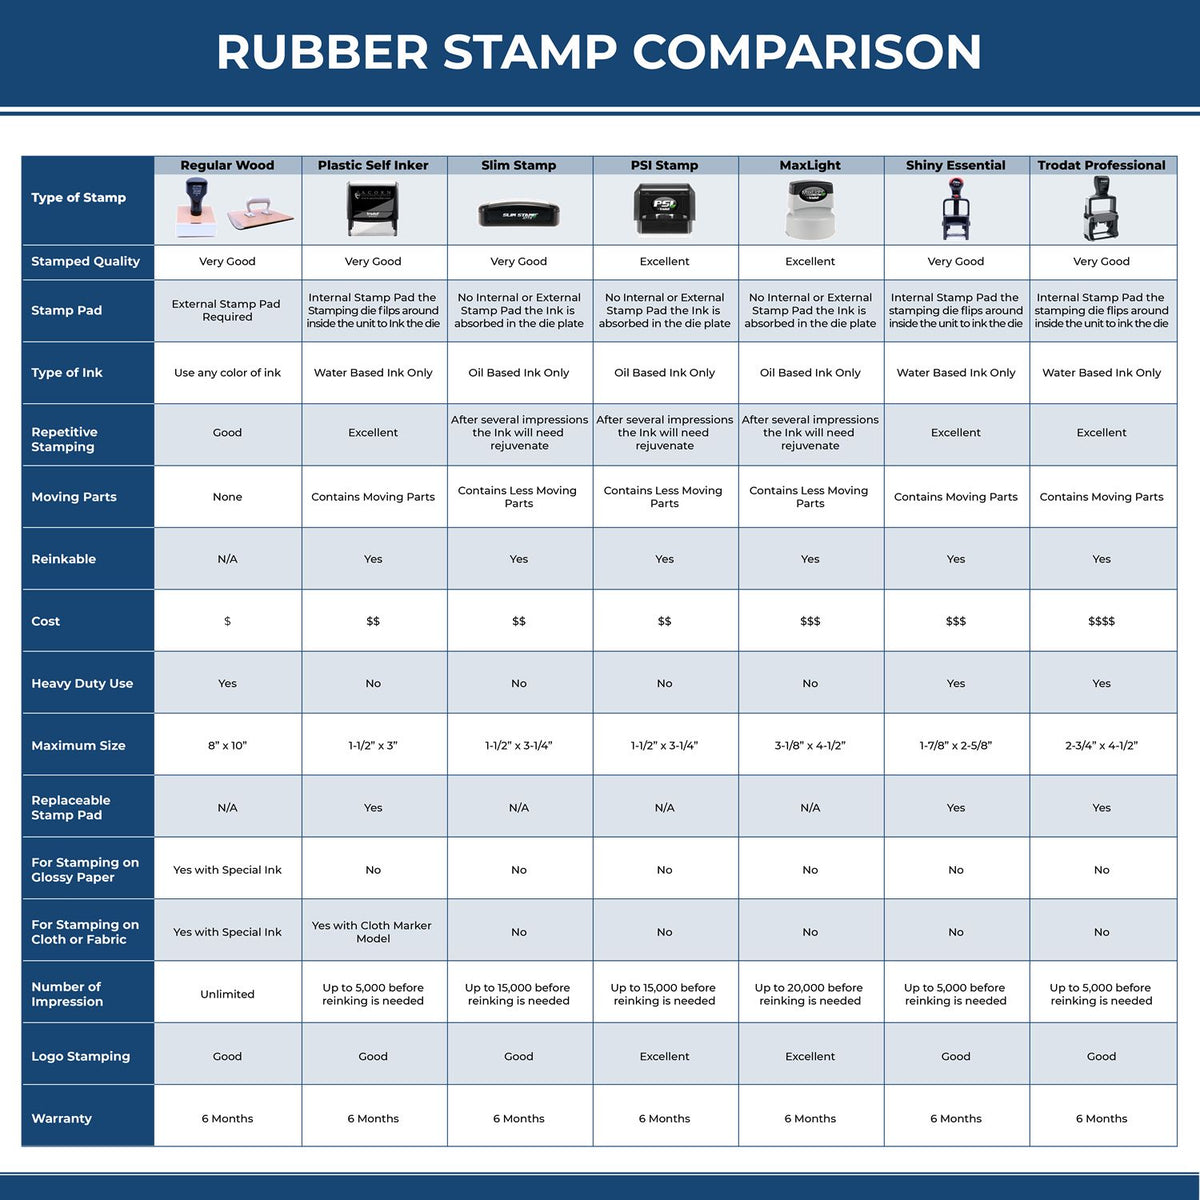 Validated Rubber Stamp 4278R Rubber Stamp Comparison